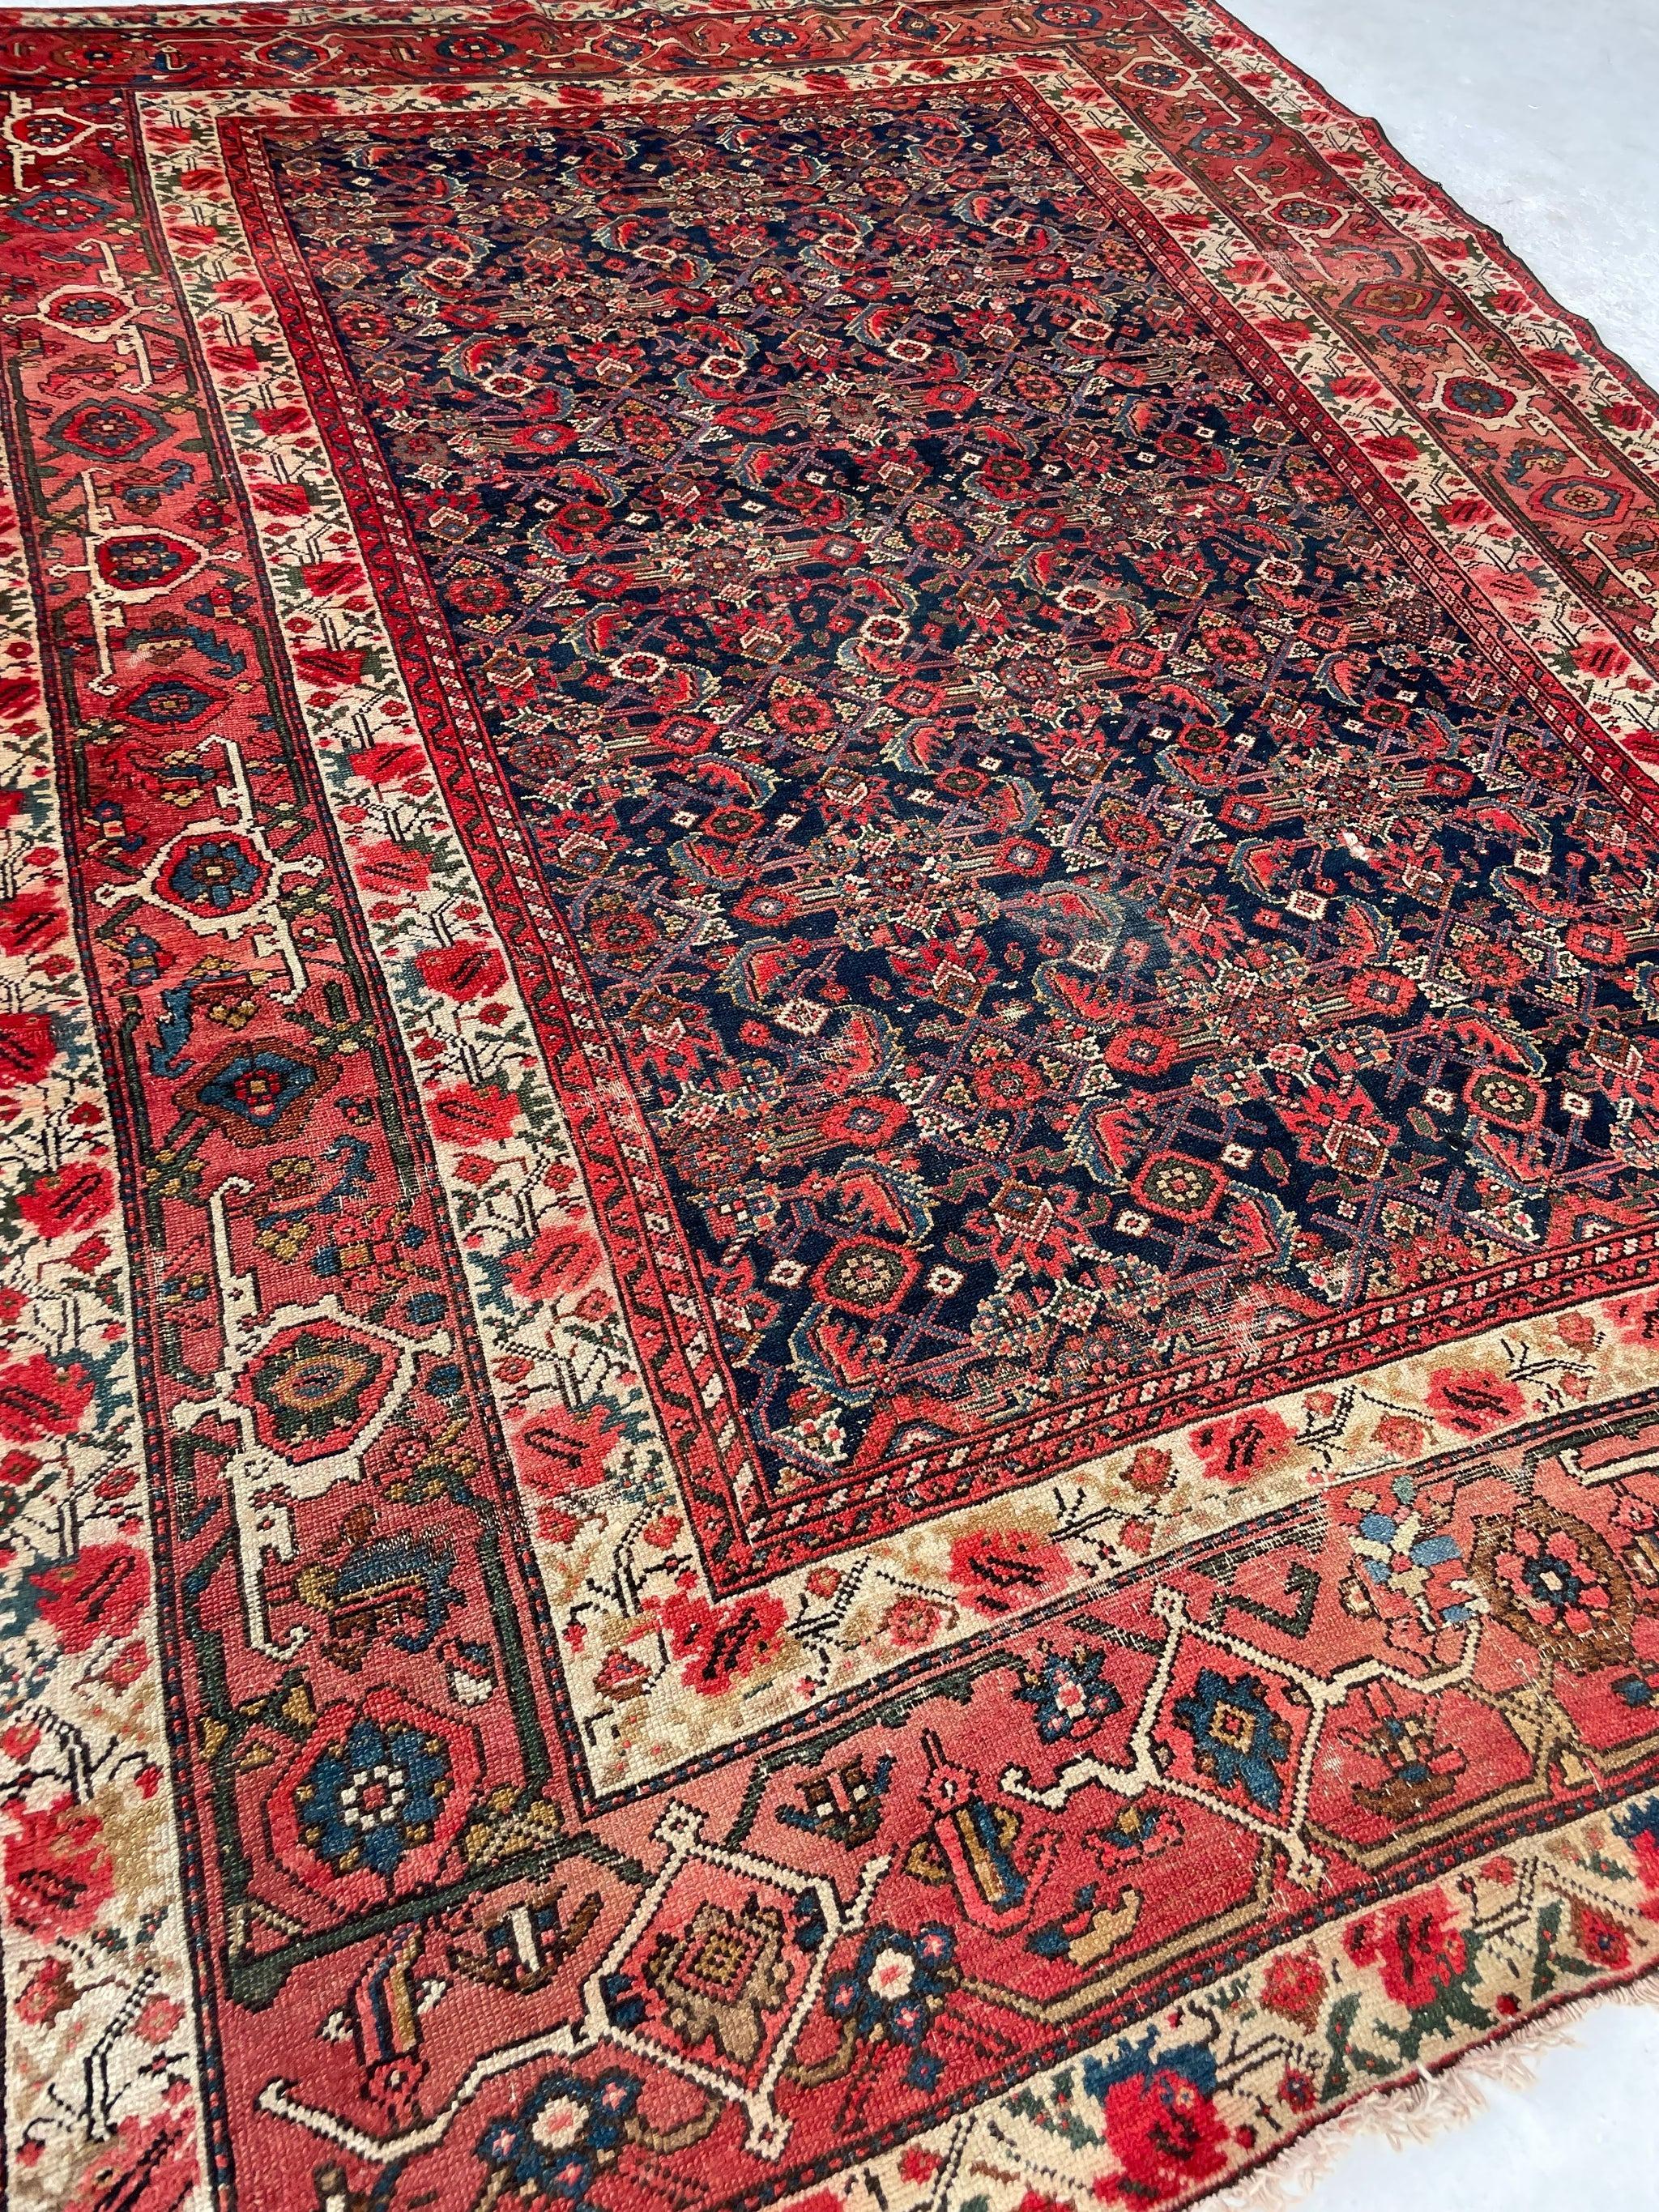 Fine Antique Persian Malayer with Several Designs Herati Field with Serapi Border

Size: 6.10 x 9.10
Age: Antique; C. 1920-30's
Pile: Low with wonderful age-related patina; some subtle color run in a few areas with some very small and